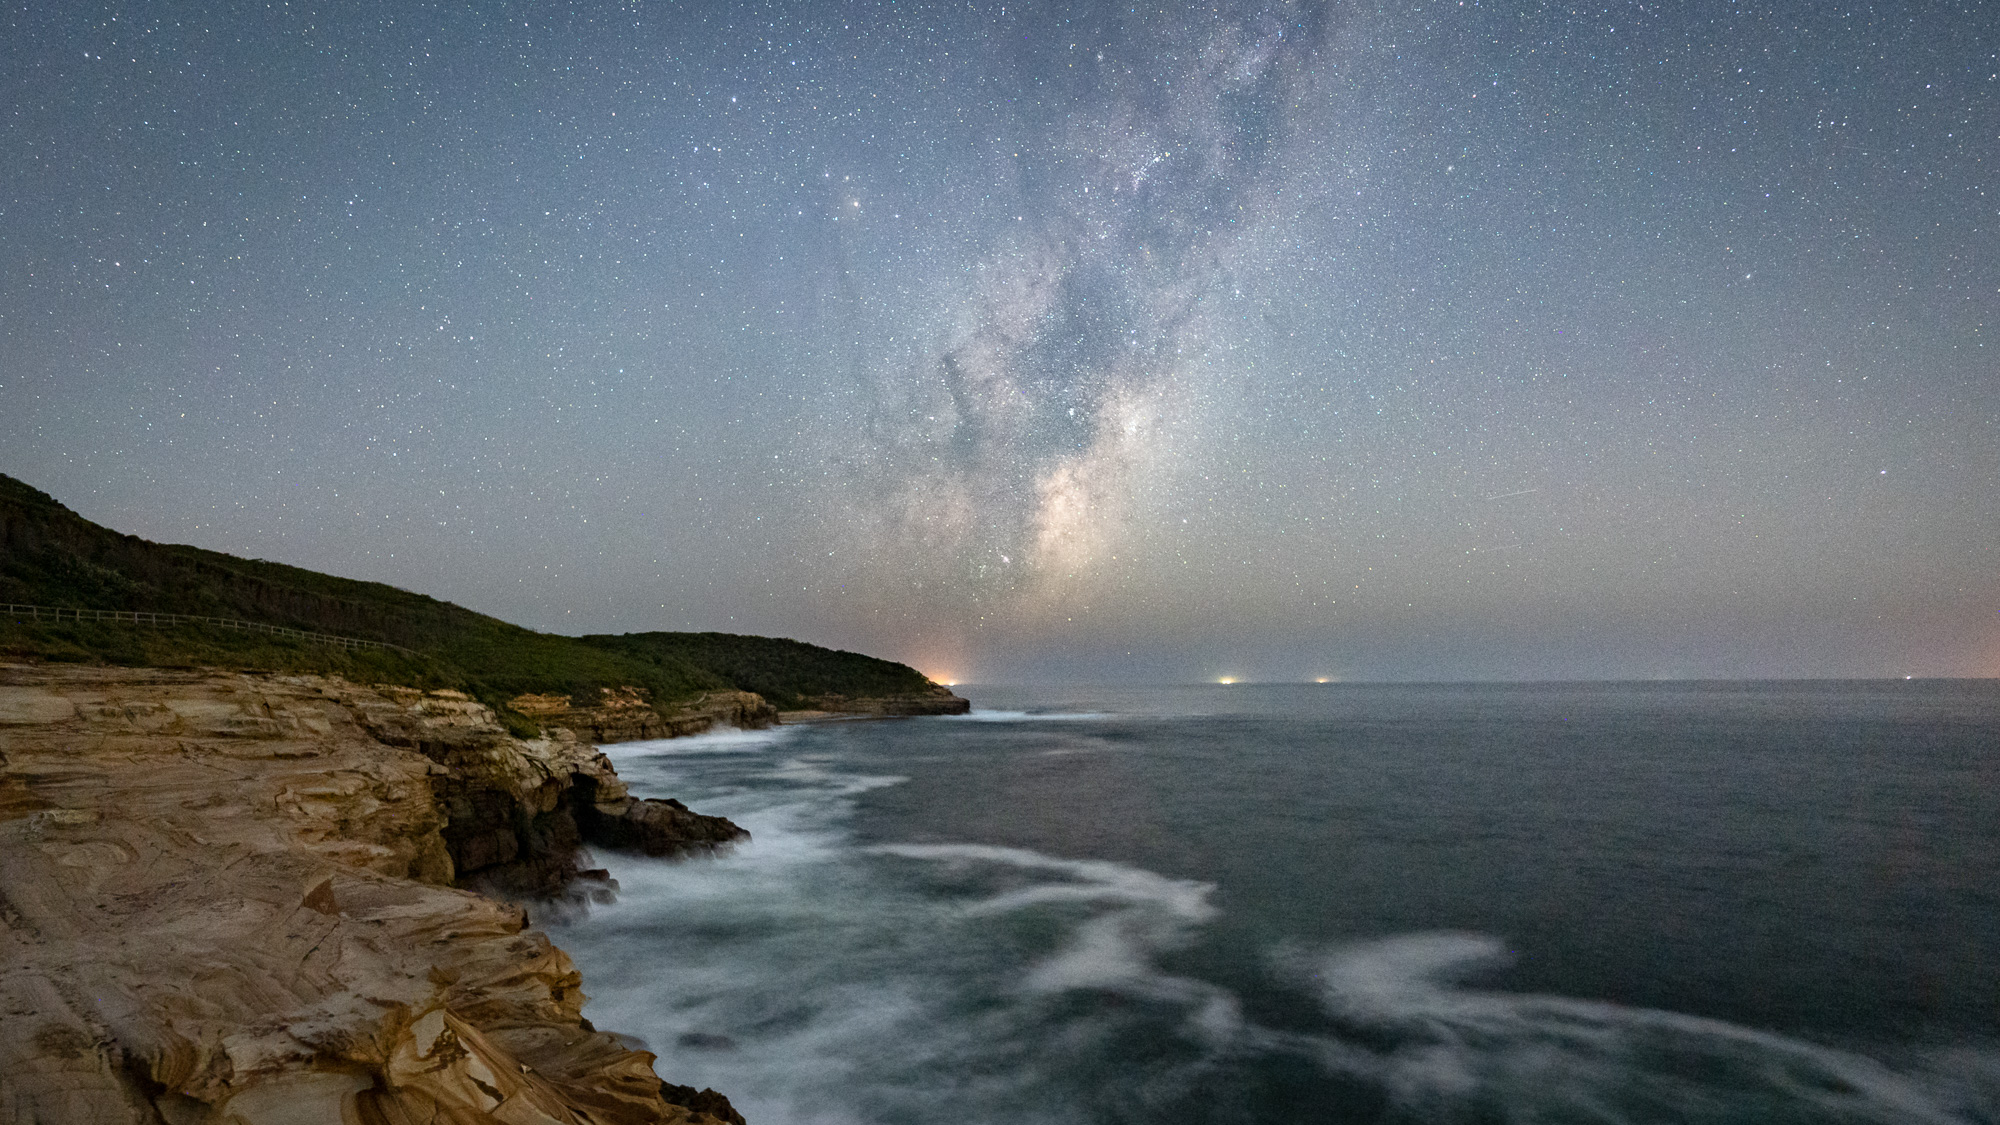 The Milky Way rises above the coast while taking in the patterned sandstone cliffs of Bouddi National Park on the Central Coast, New South Wales, Australia